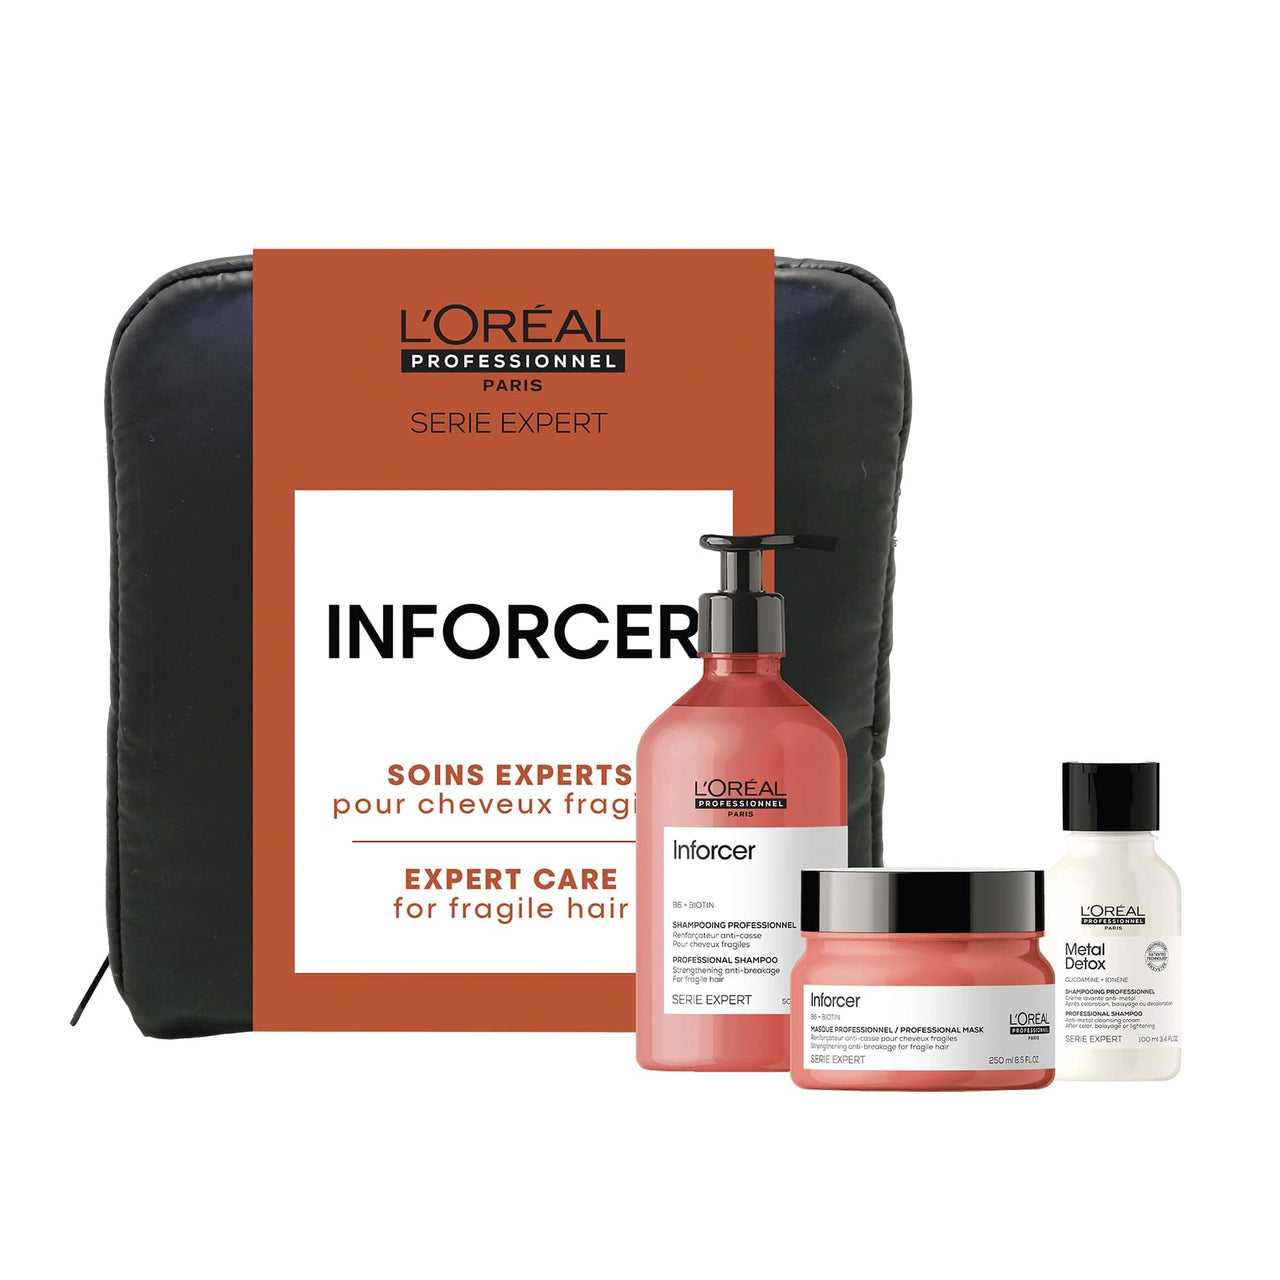 L'OREAL PROFESSIONNEL_Inforcer Holiday Kit_Cosmetic World